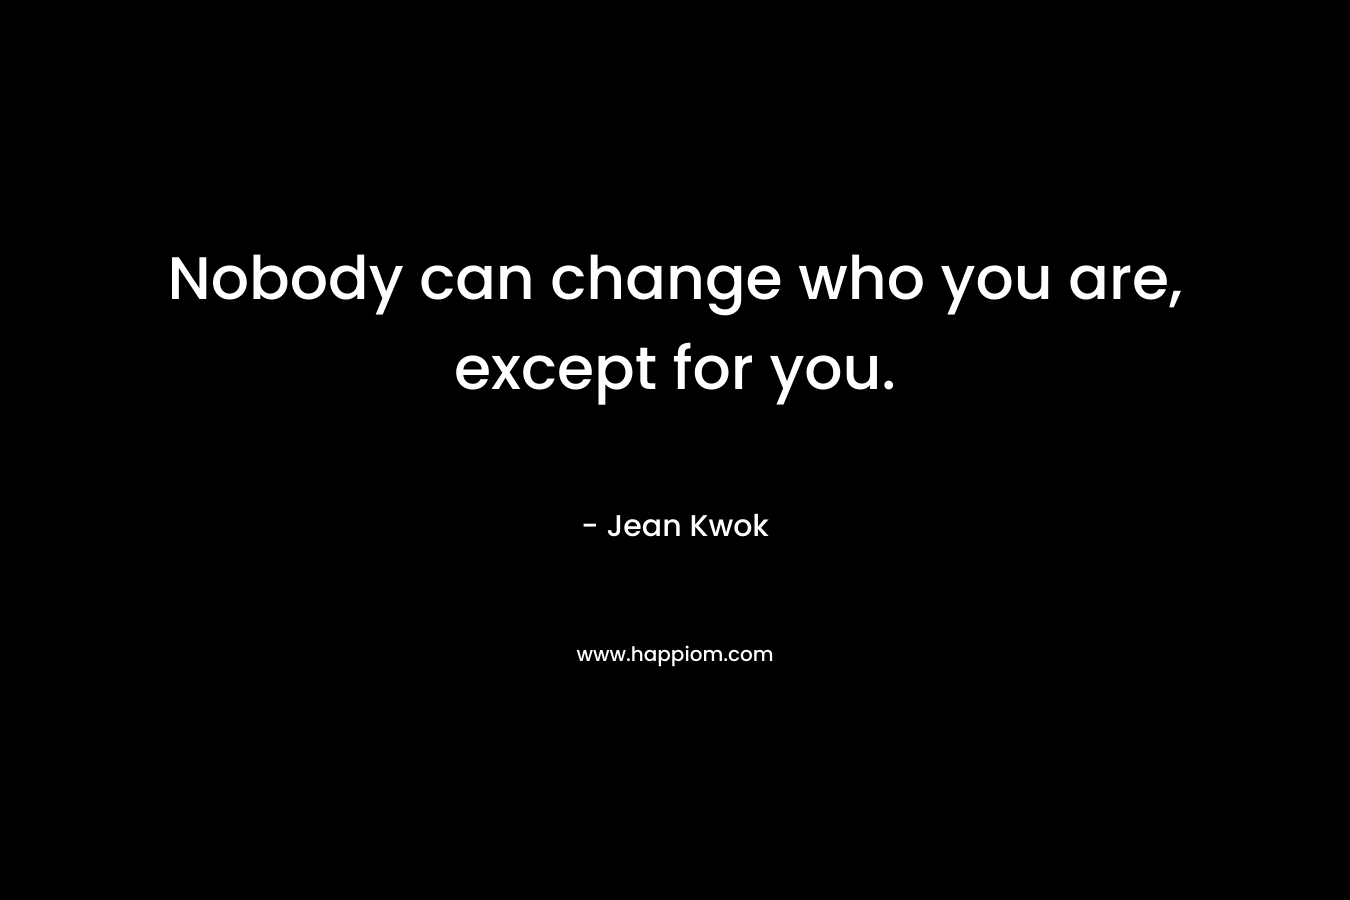 Nobody can change who you are, except for you. – Jean Kwok